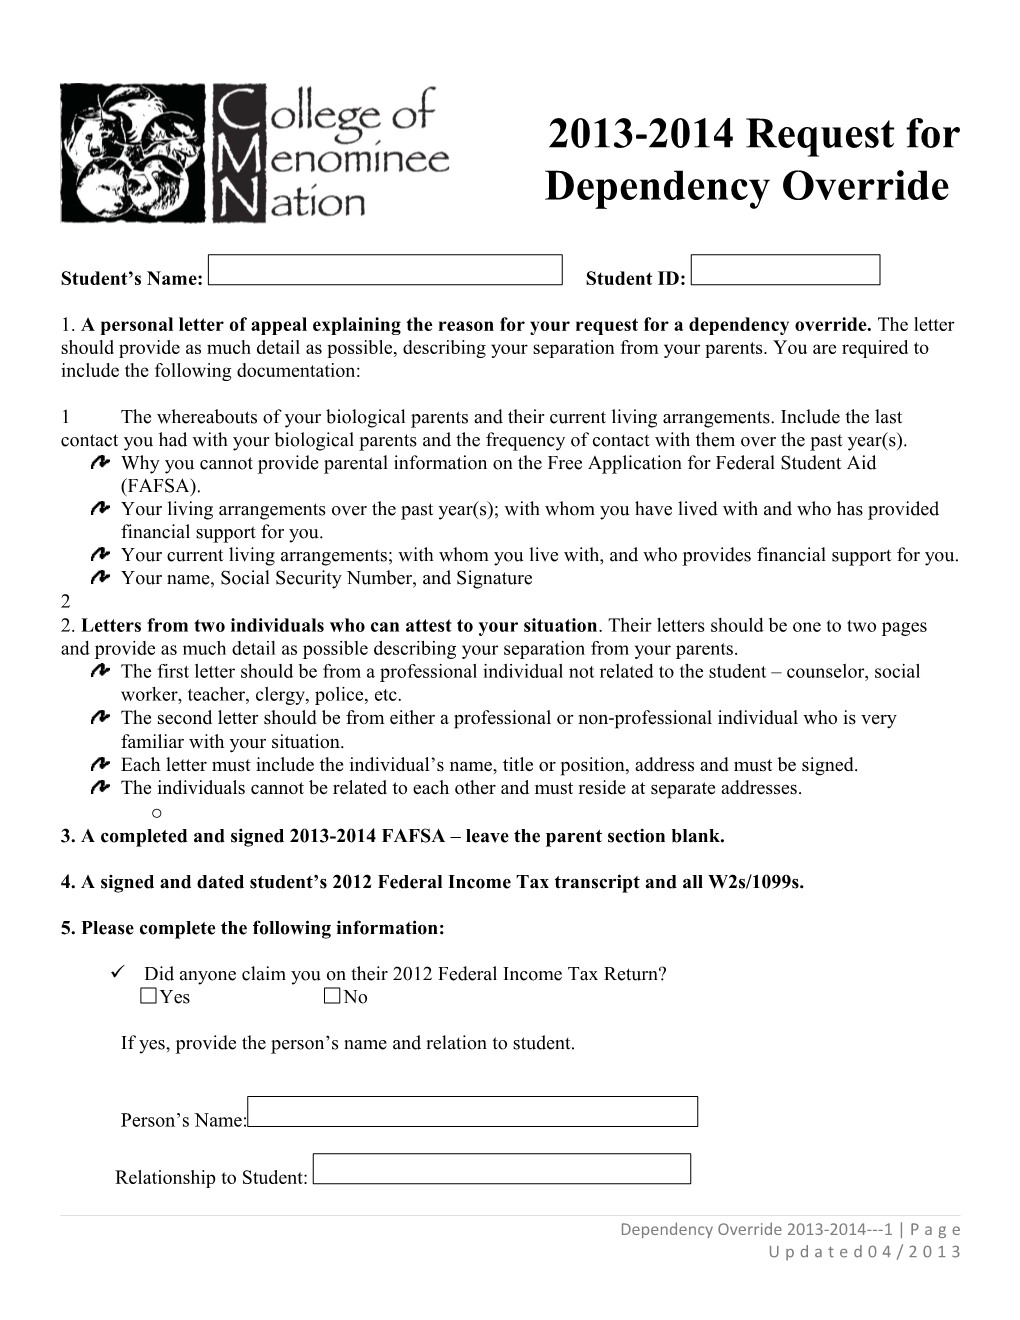 Dependency Override Will Not Be Processed Until All Required Documents Are Submitted